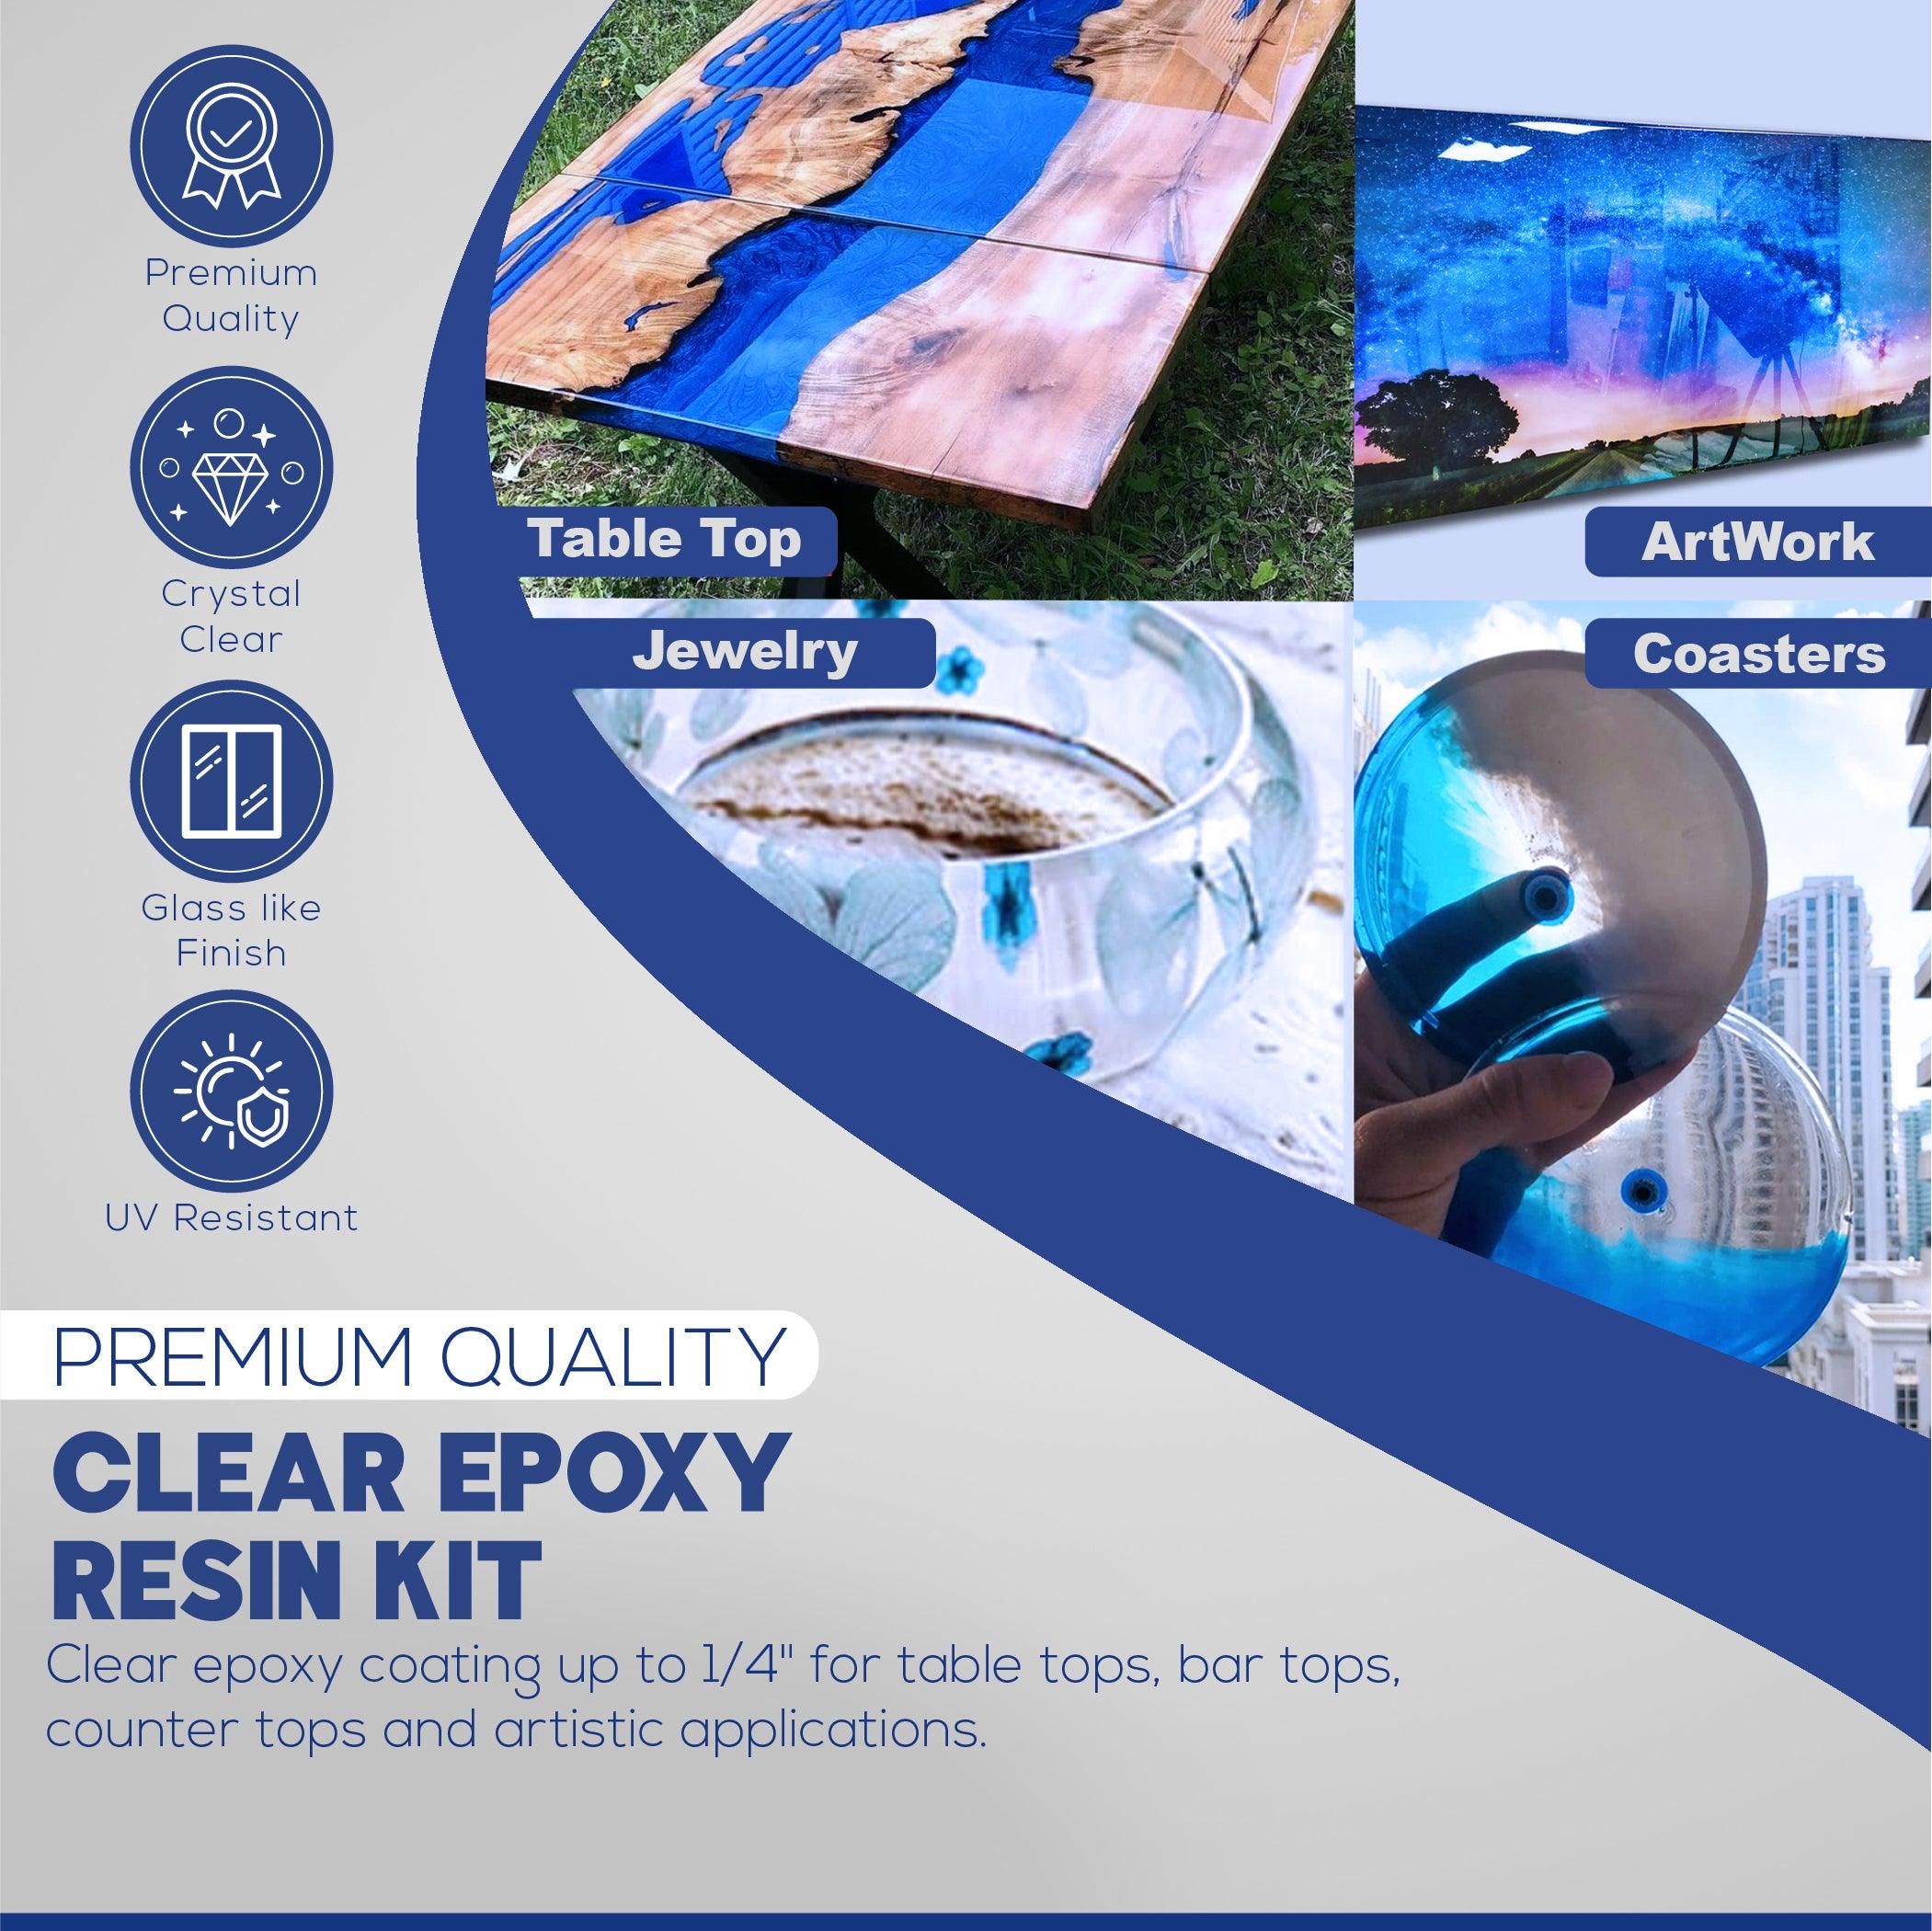 Let's Resin 1 Gallon Clear Epoxy Resin Kit, Bubble Free & Crystal Clear Epoxy Resin for Countertops, River Tables, Table Top, Coating, Casting